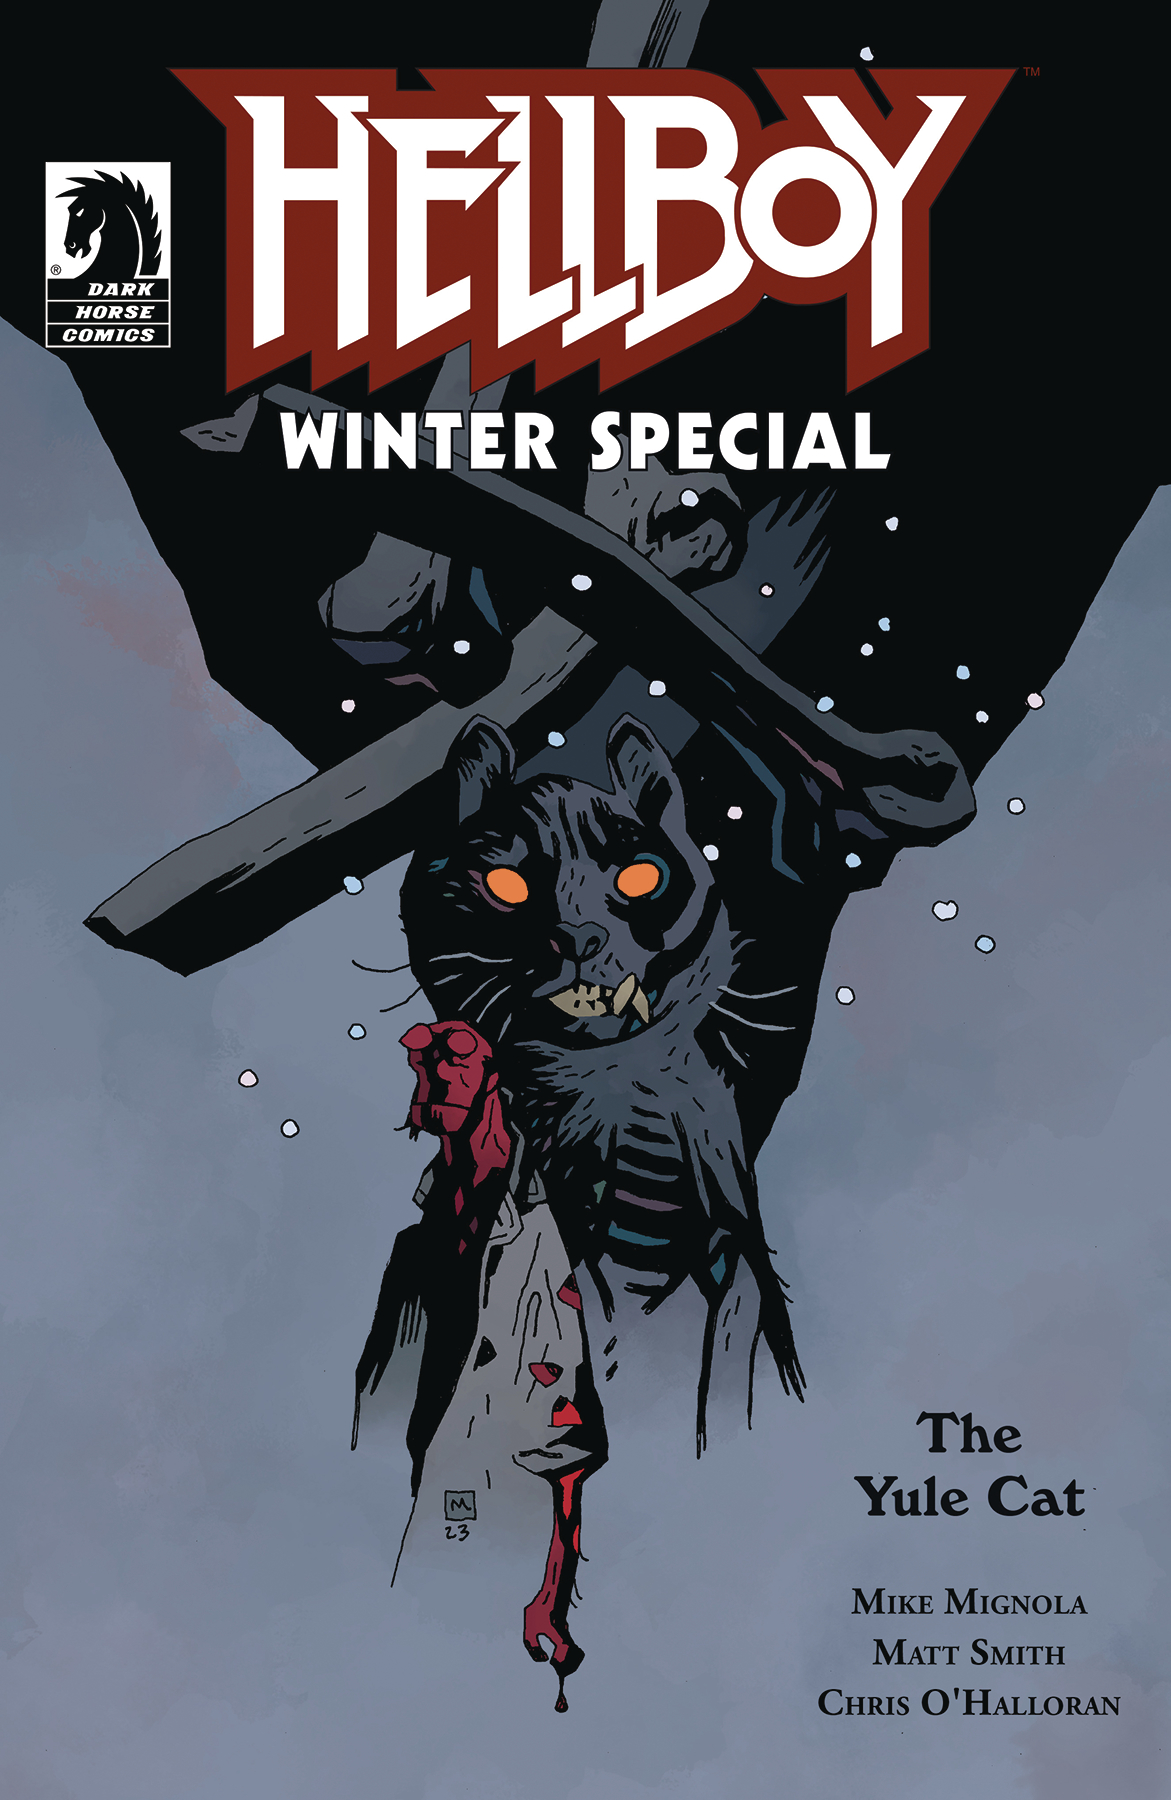 Hellboy & the B.P.R.D. Ongoing #70 Hellboy Winter Special The Yule Cat One-Shot Cover B (Mike Mignola)